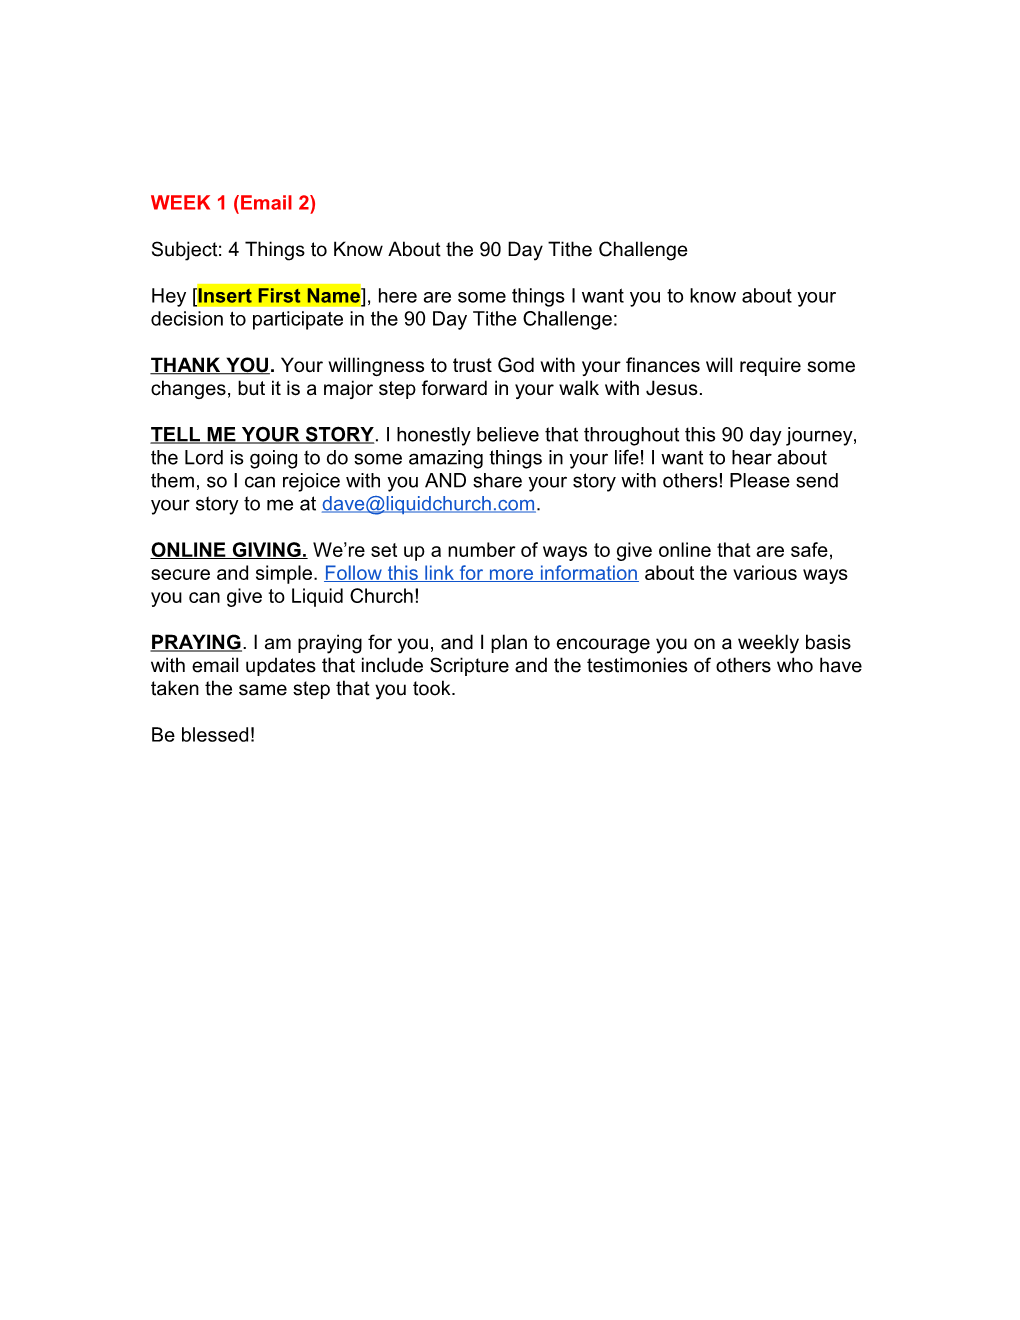 TITHE CHALLENGE Weekly Follow-Up Emails